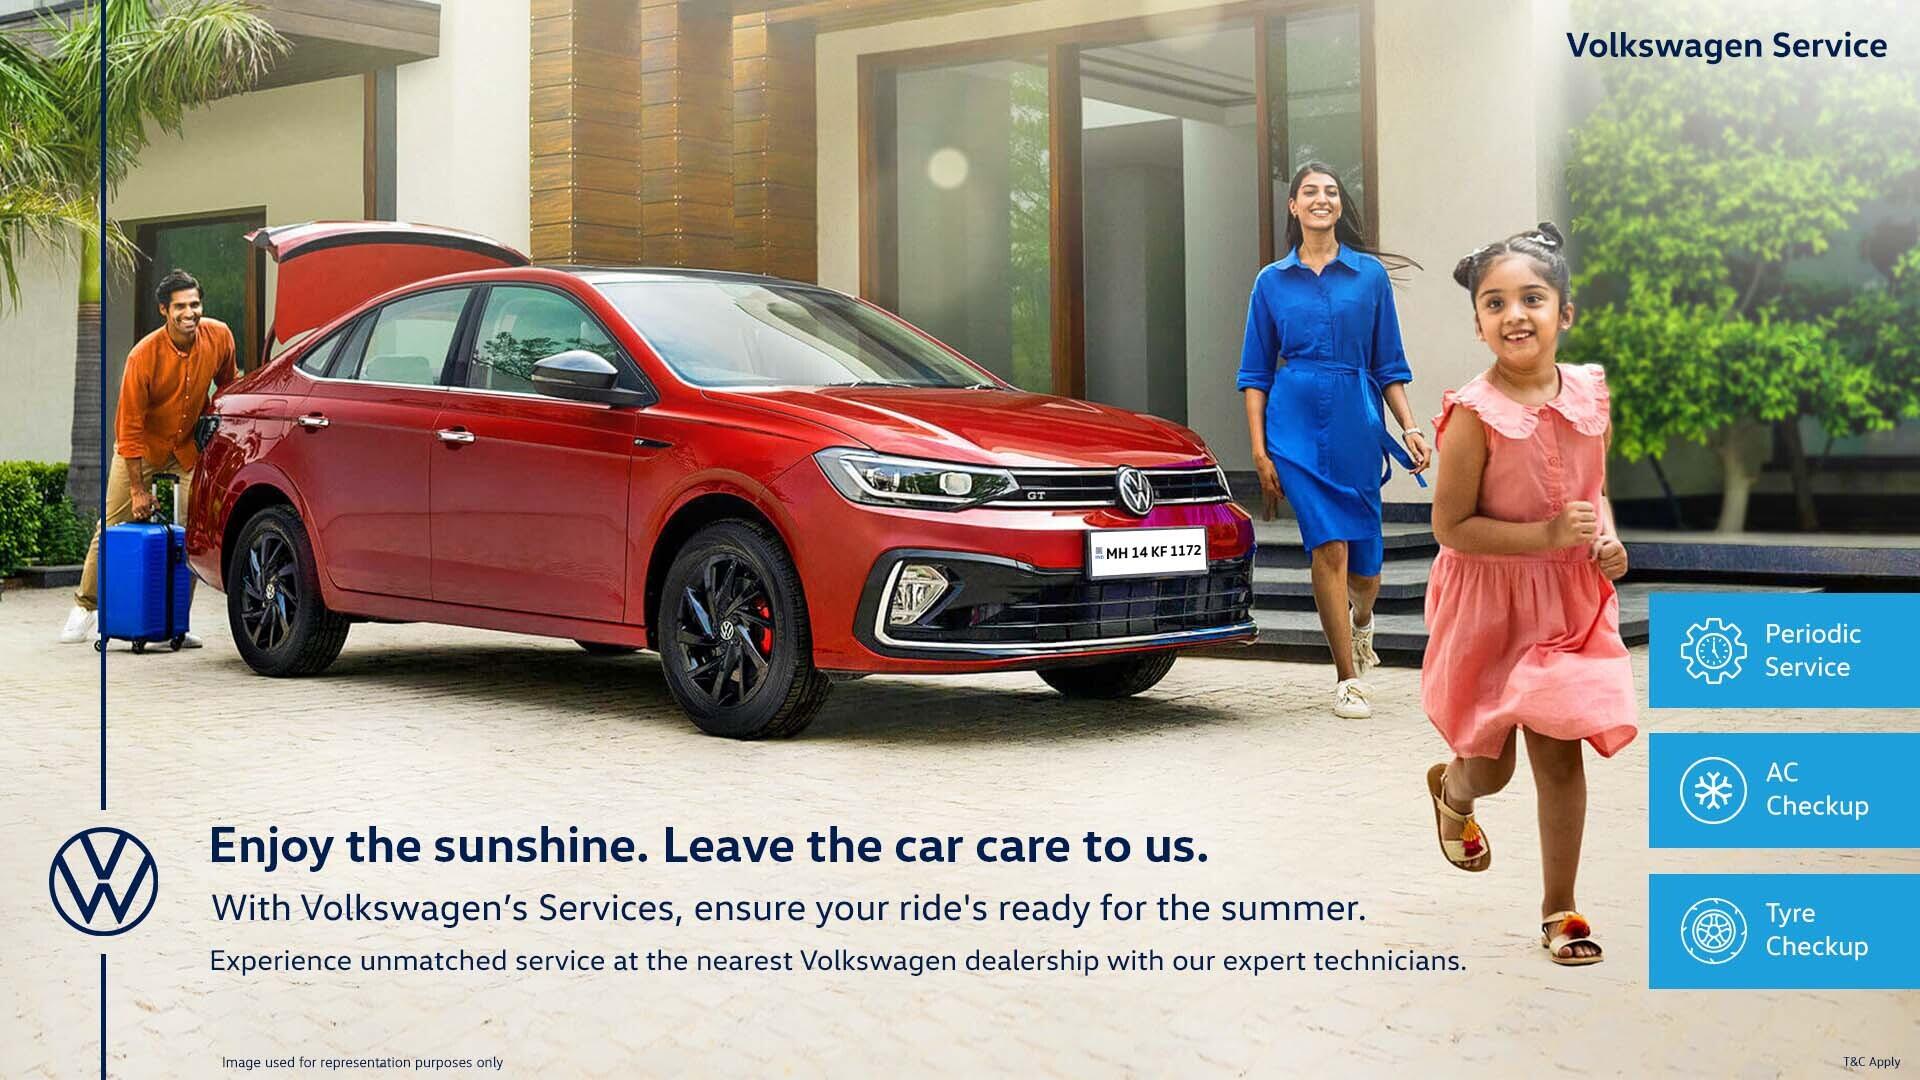 Volkswagen India announces its Summer Car Care Campaign